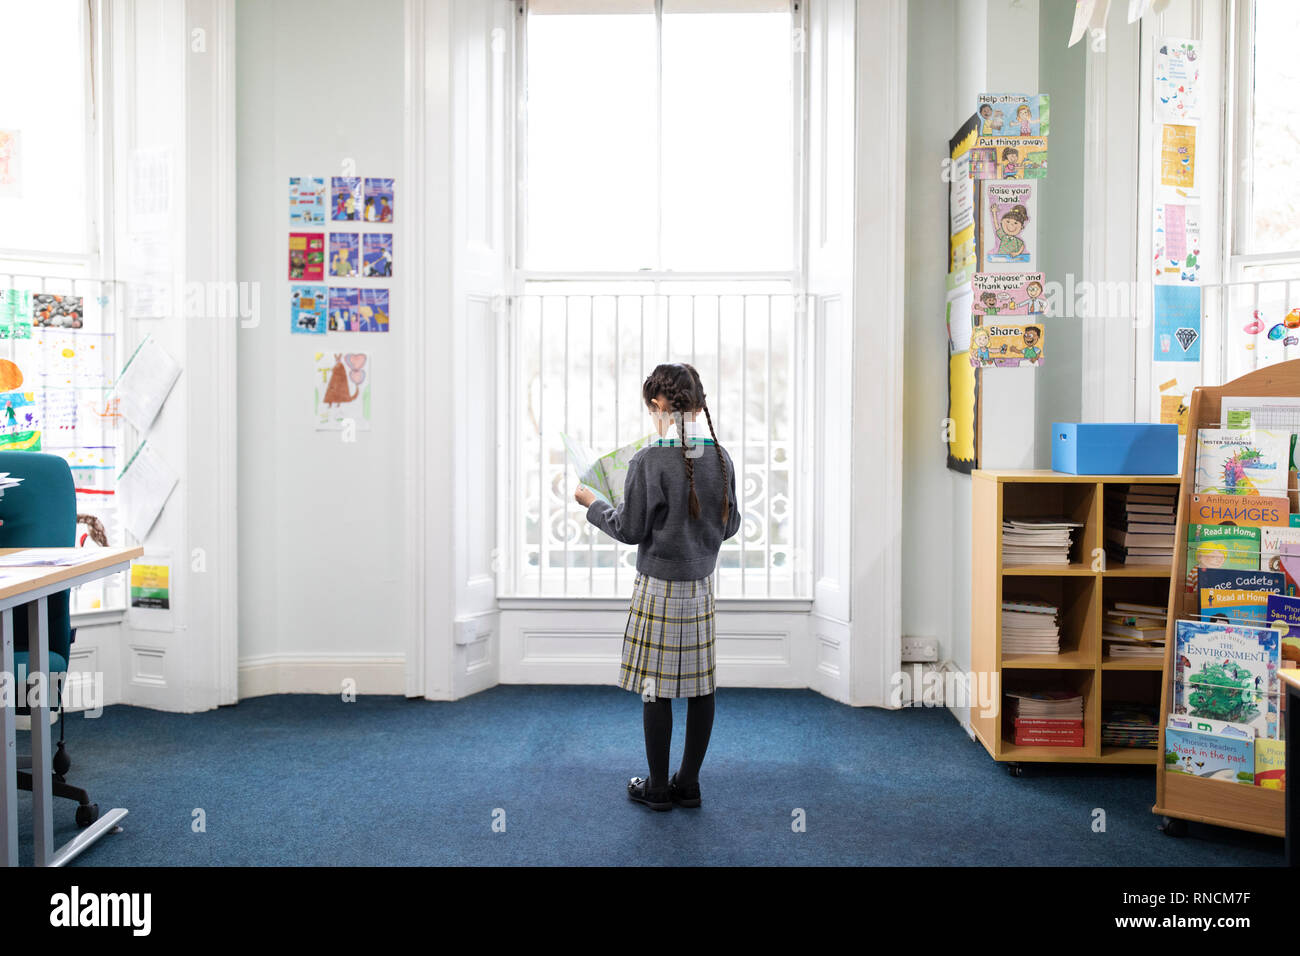 Primary school aged girl reading a book in front of classroom window Stock Photo